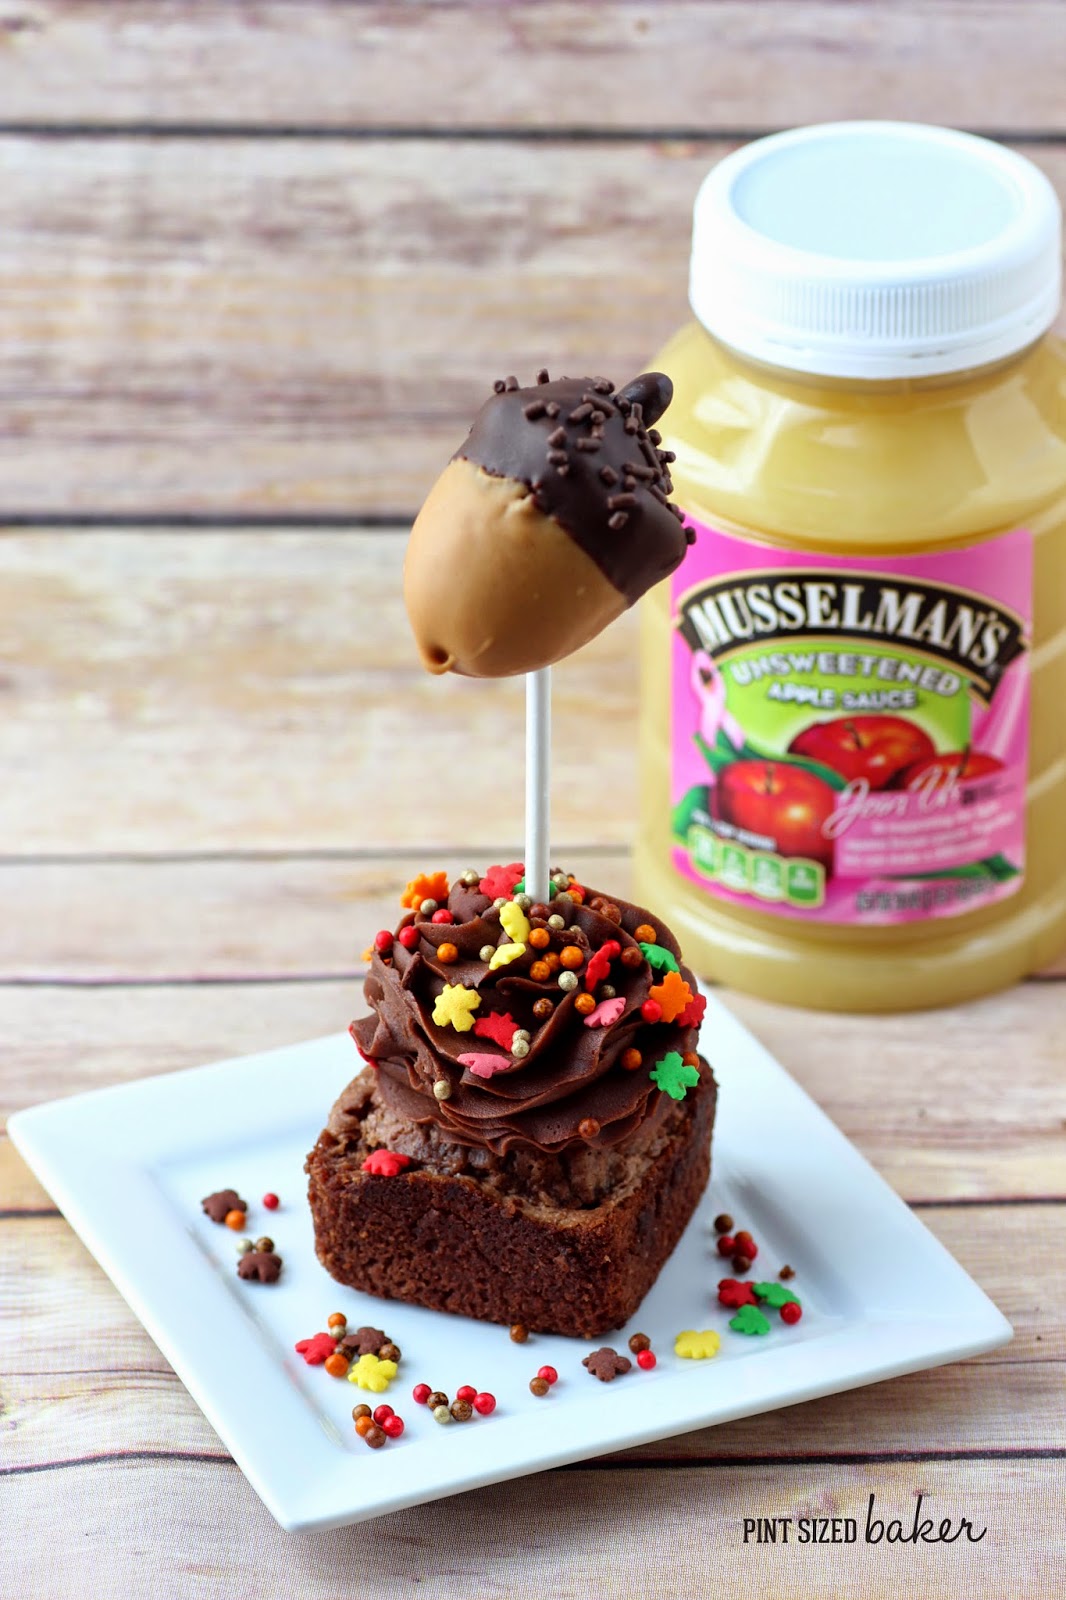 Brownies made fun!! Turn your basic brownie mix into fun Acorn Brownie Pops! These are so easy to make and the kids love them!